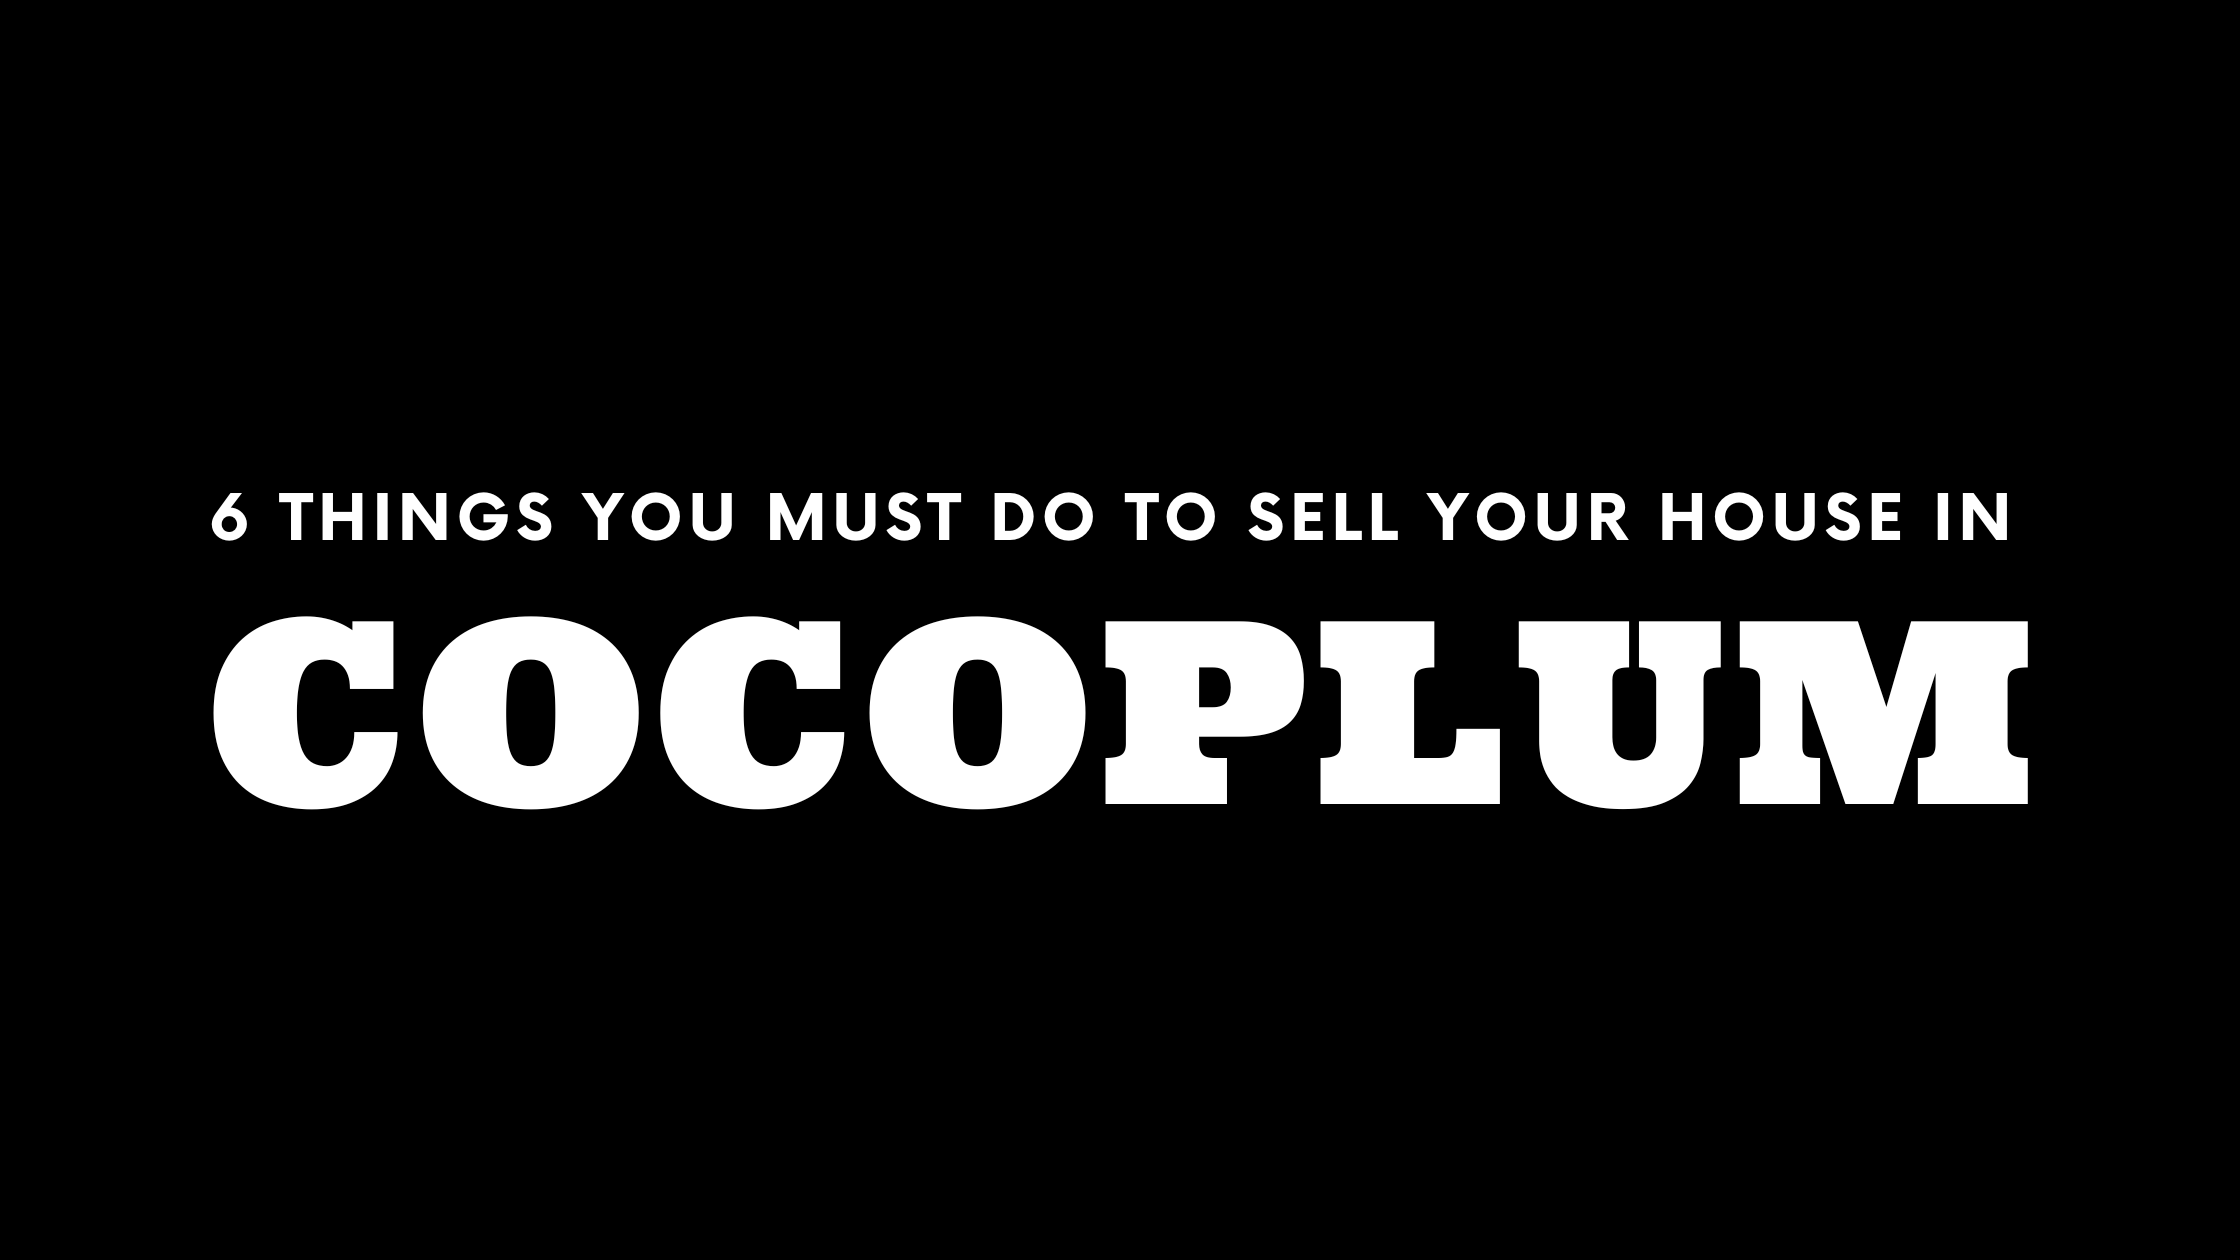 Selling Your House in Cocoplum? 6 Things You MUST Do!